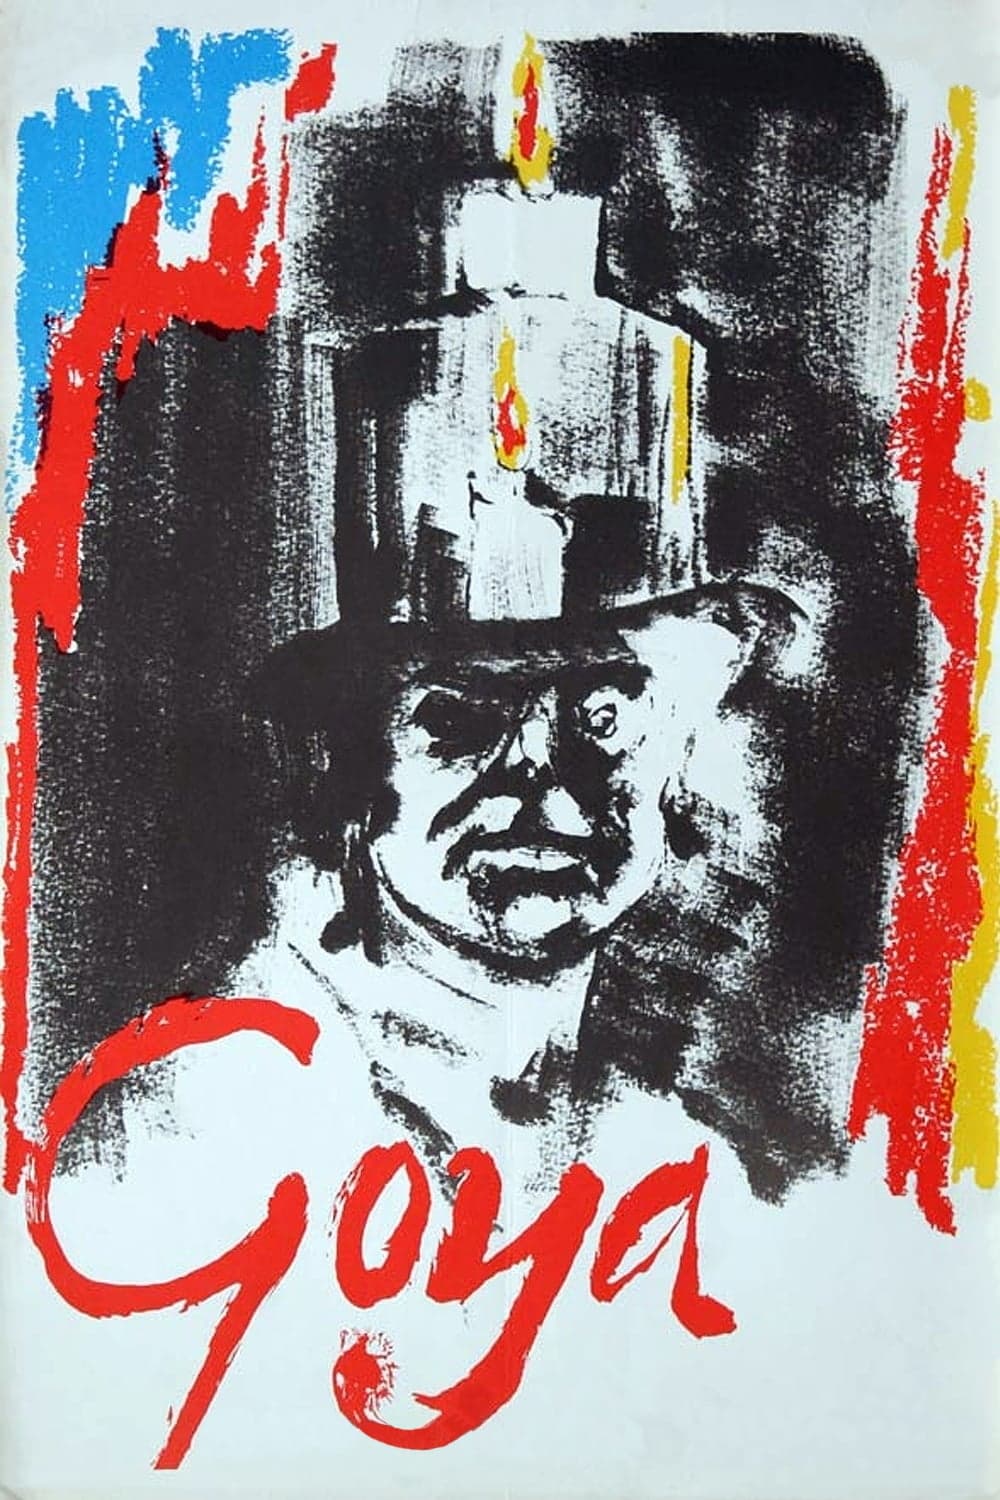 Goya: Or the Hard Way to Enlightenment (1971)